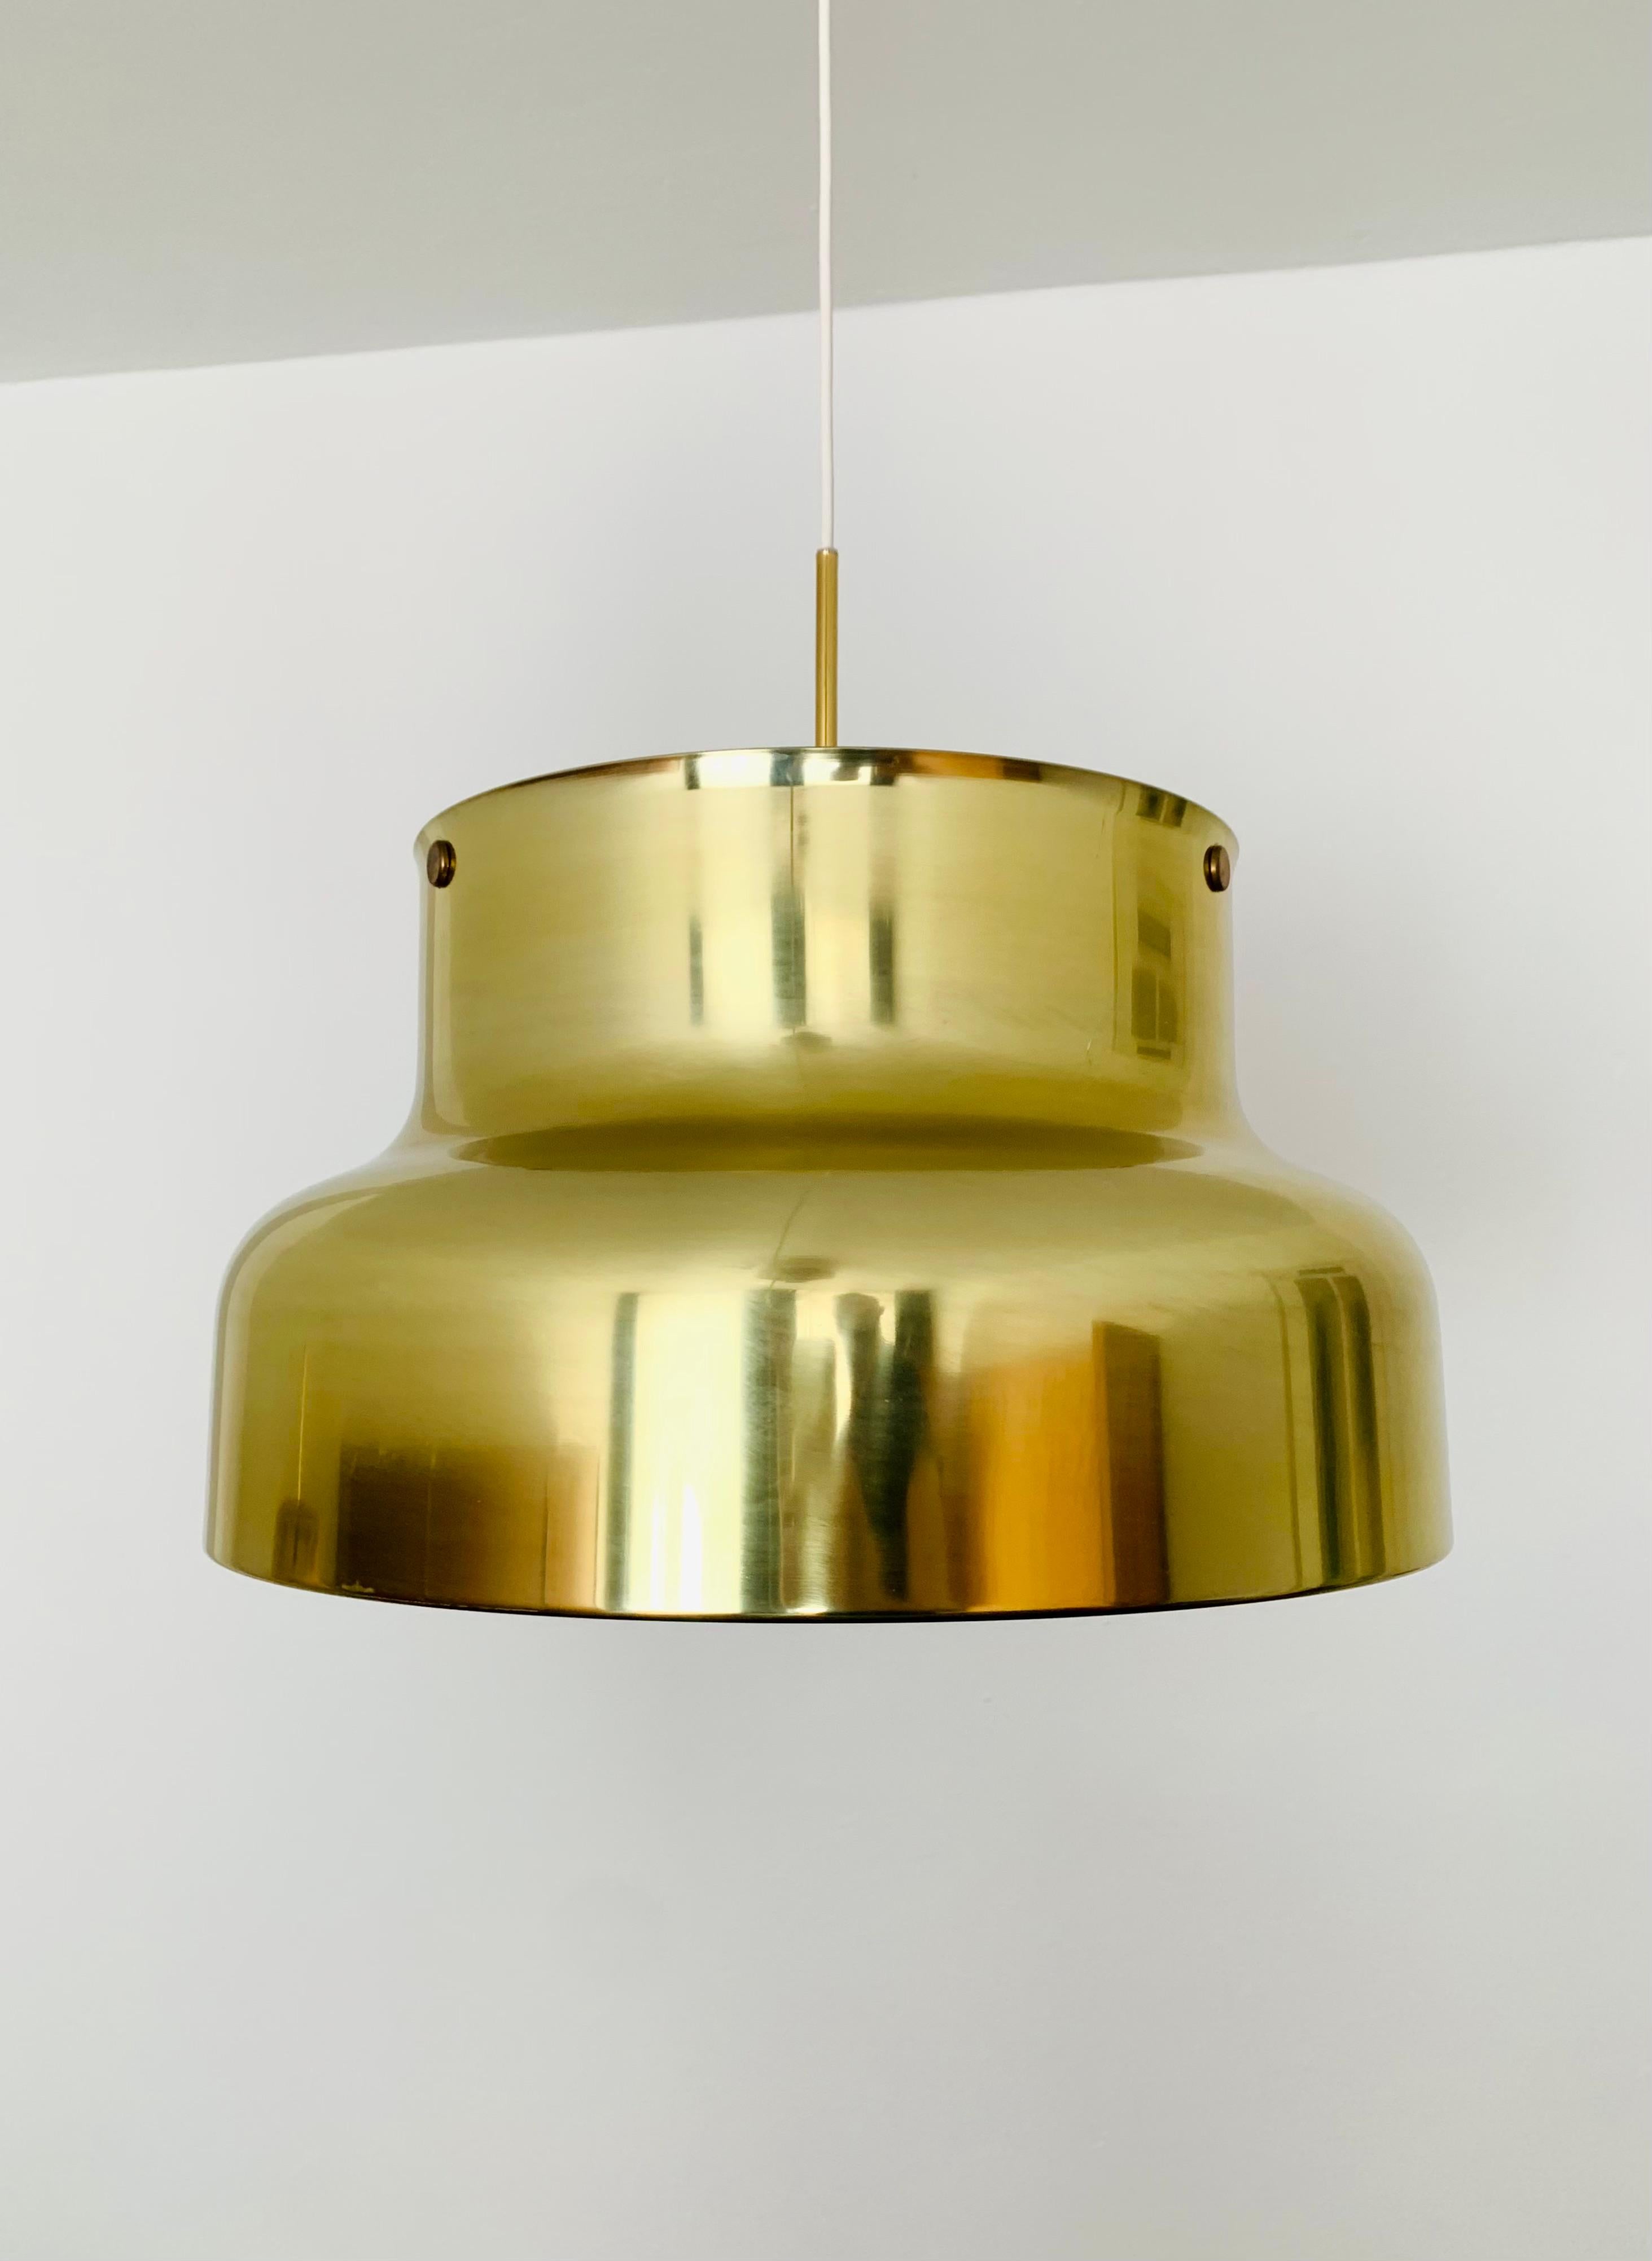 Wonderful Bumling pendant lamp with reflector from the 1960s.
The design of the lamp is a real asset and an absolute favorite for every home.
A very nice play of light is created.

Design: Anders Pehrson
Manufacturer: Atelje Lyktan Ahus

The